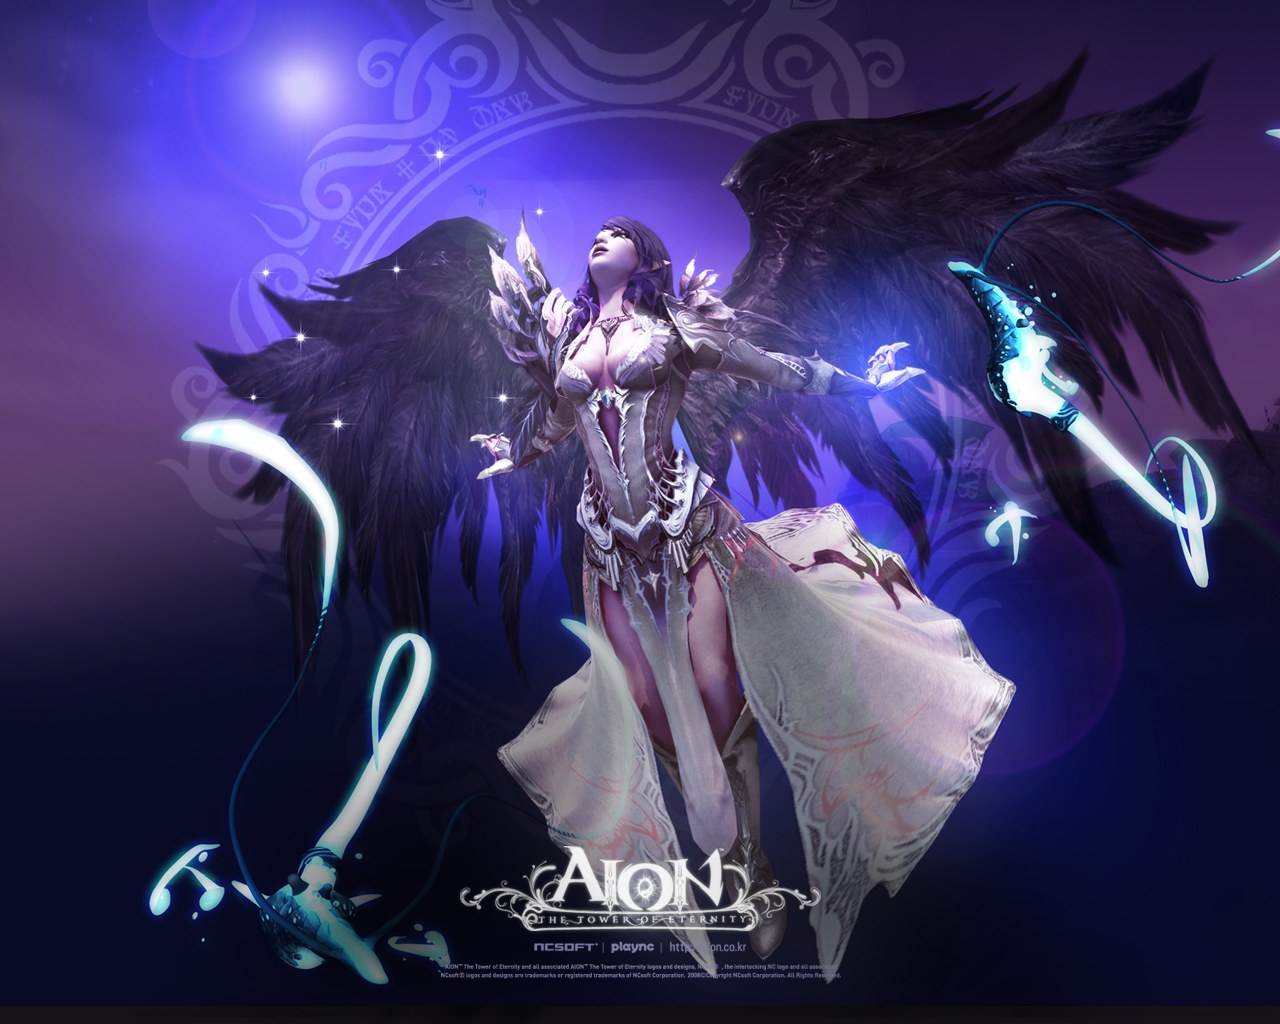 Aion Game Widescreen Wallpaper Driverlayer Search Engine